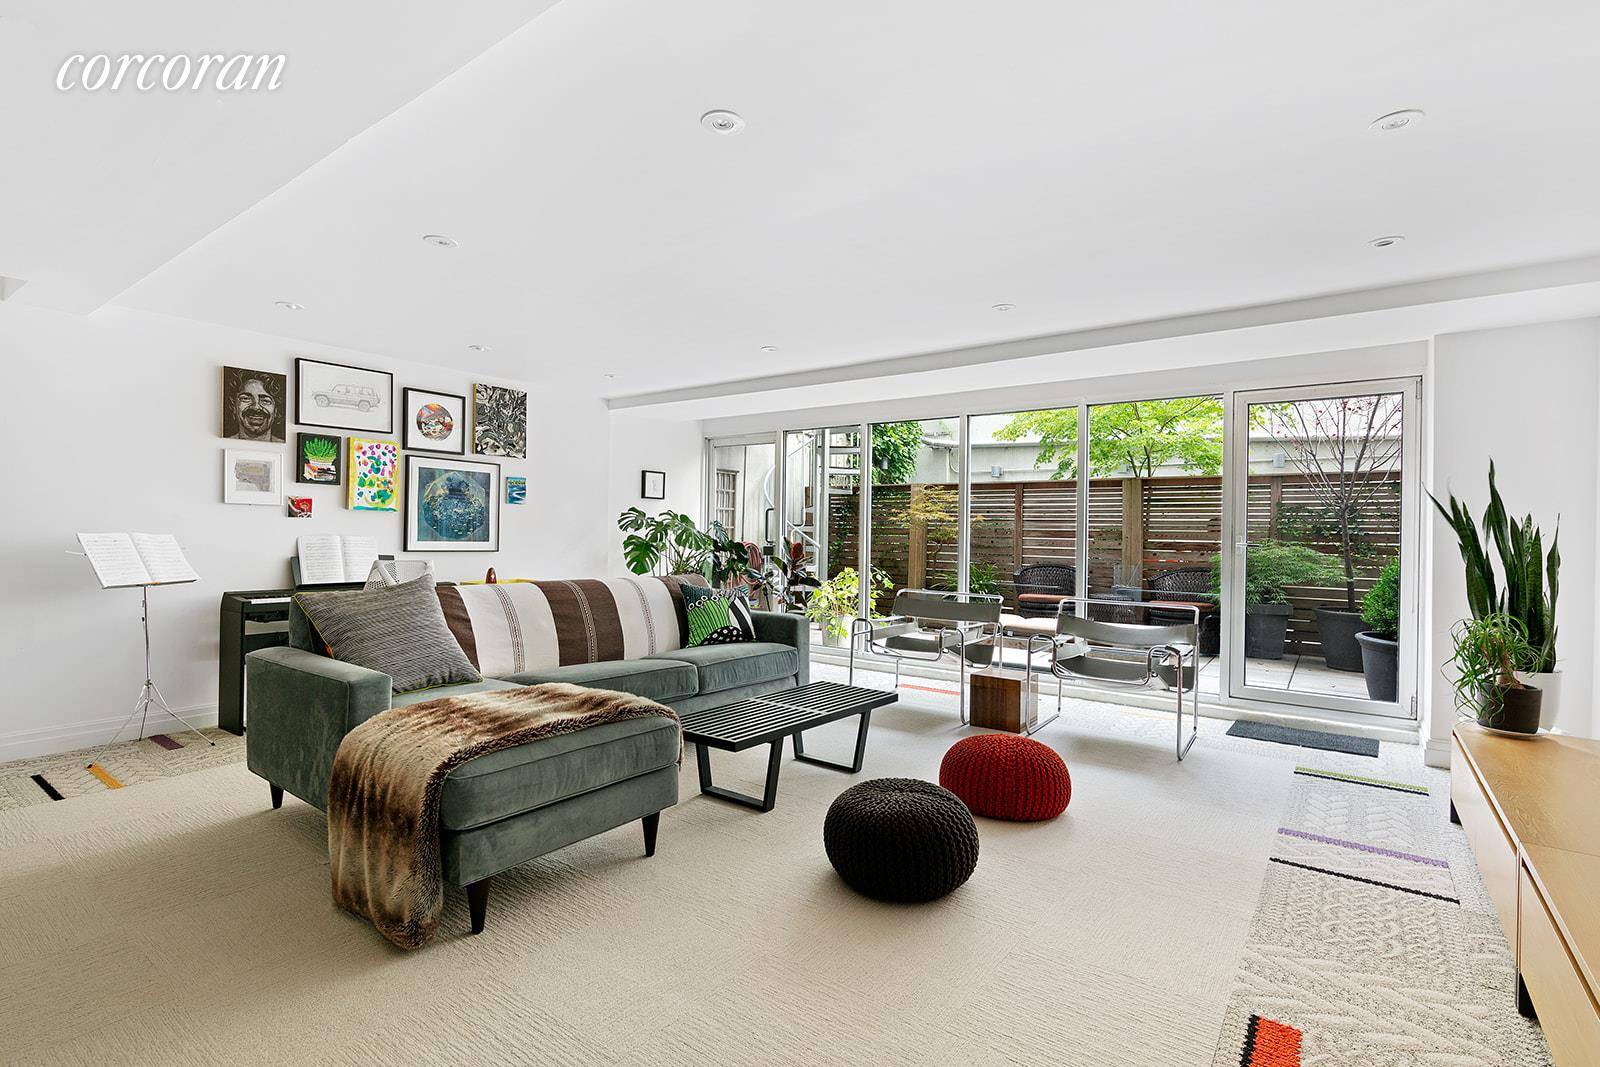 Set foot into a stunning, multi level, townhouse style loft with a leisurely Californian vibe, where no expense was spared to achieve this phenomenal yet functional residence.